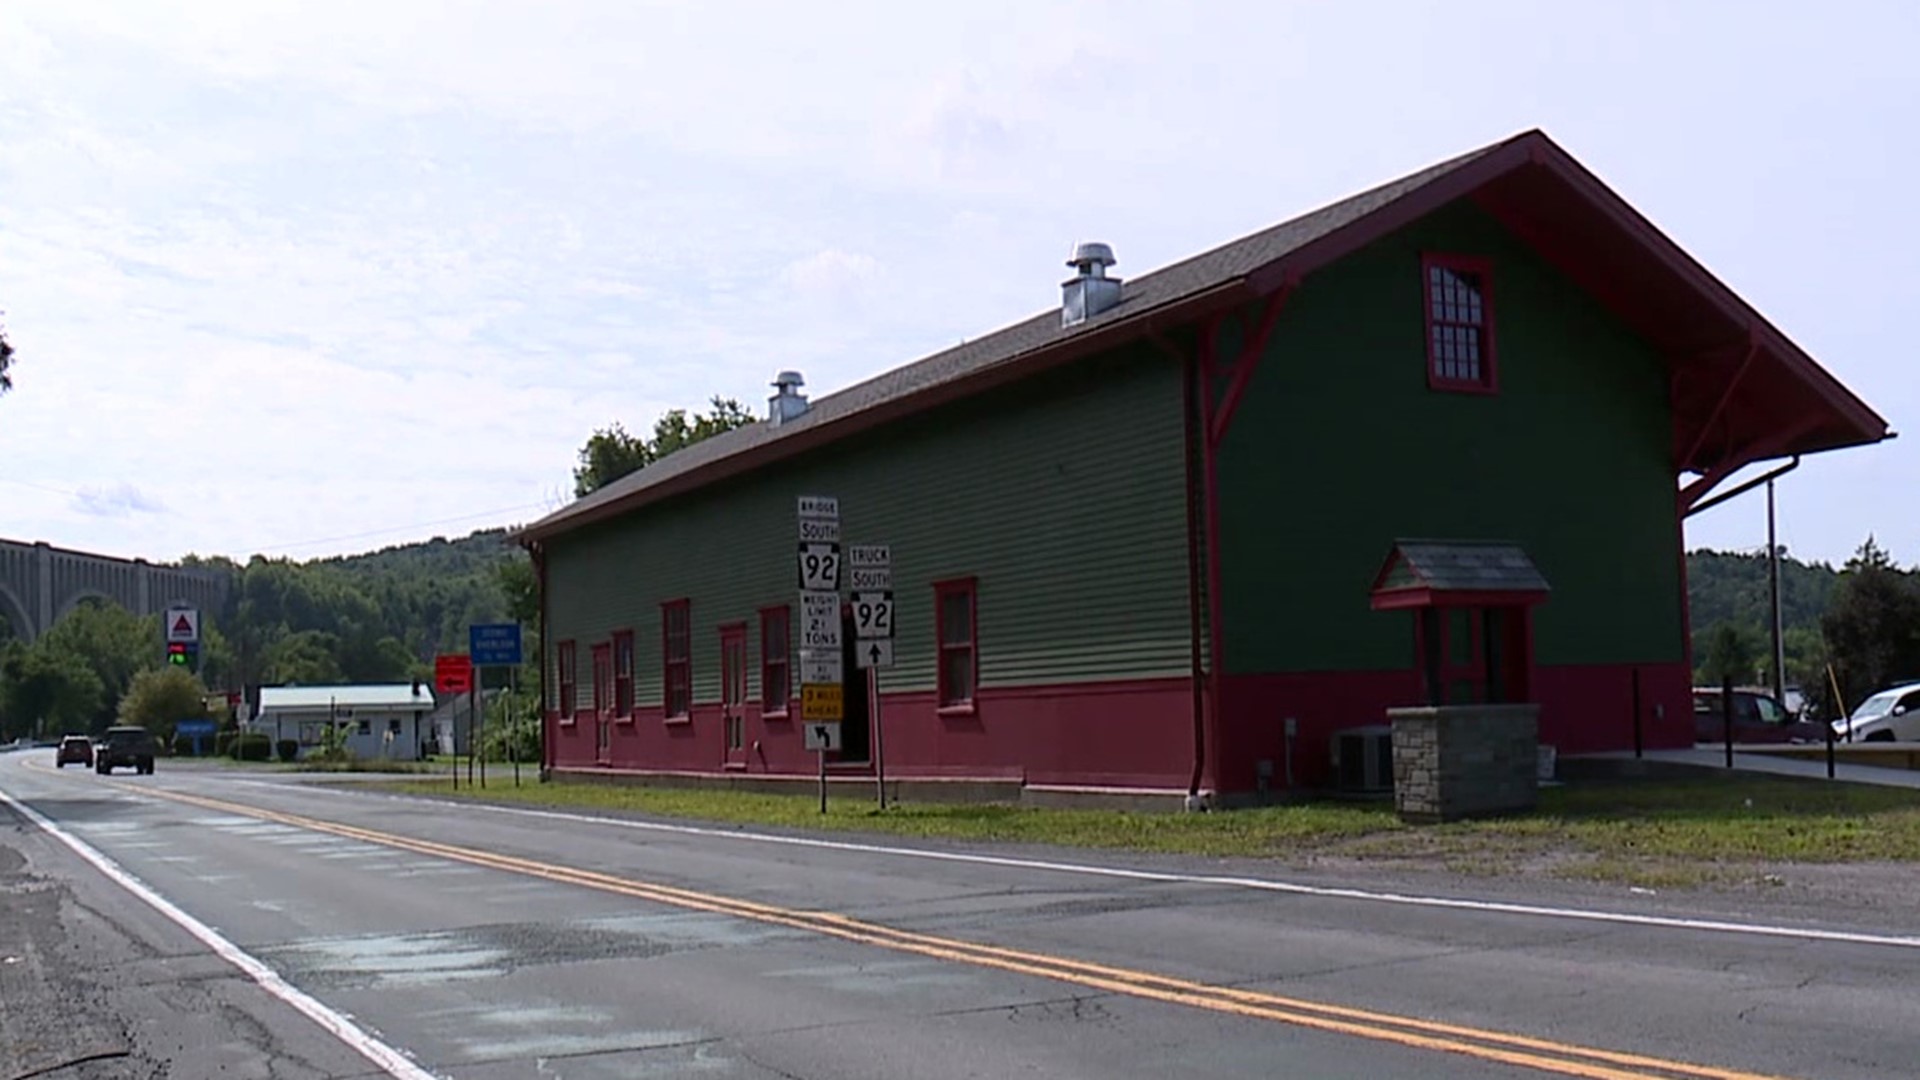 The depot in Nicholson was the first to be built along the DL&W railroad.